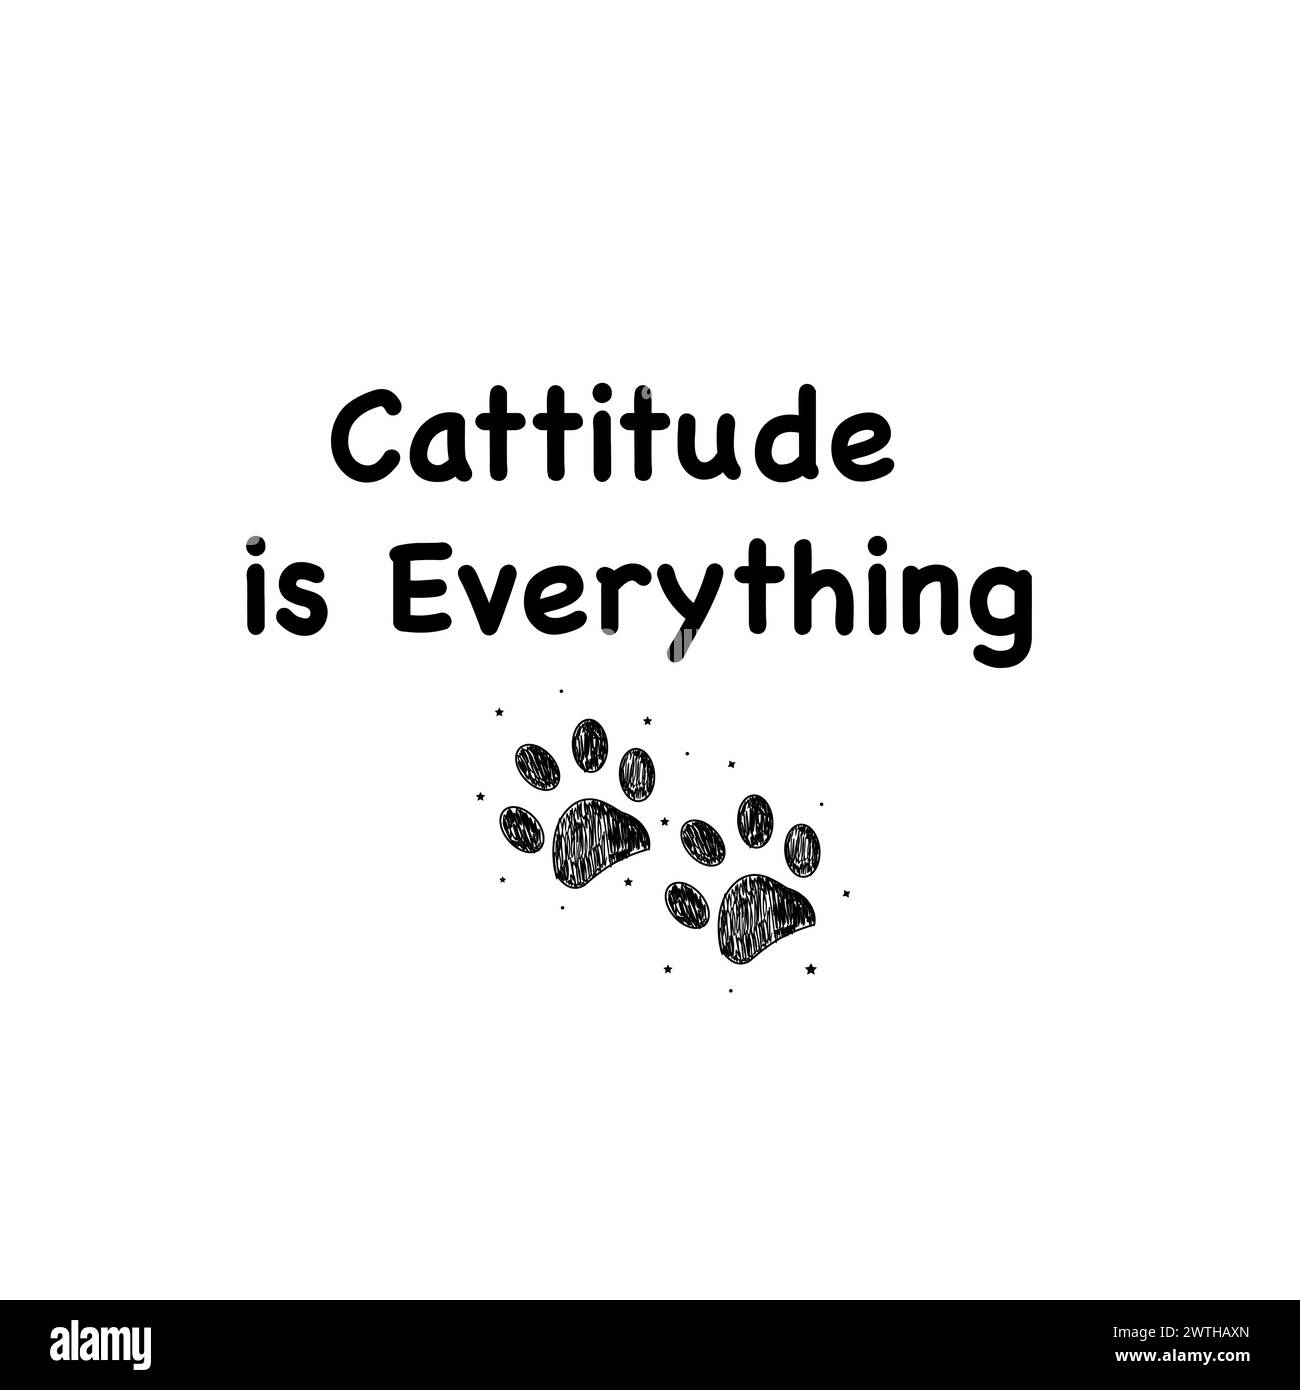 Cattitude is Everything text. T shirt or design element Stock Vector